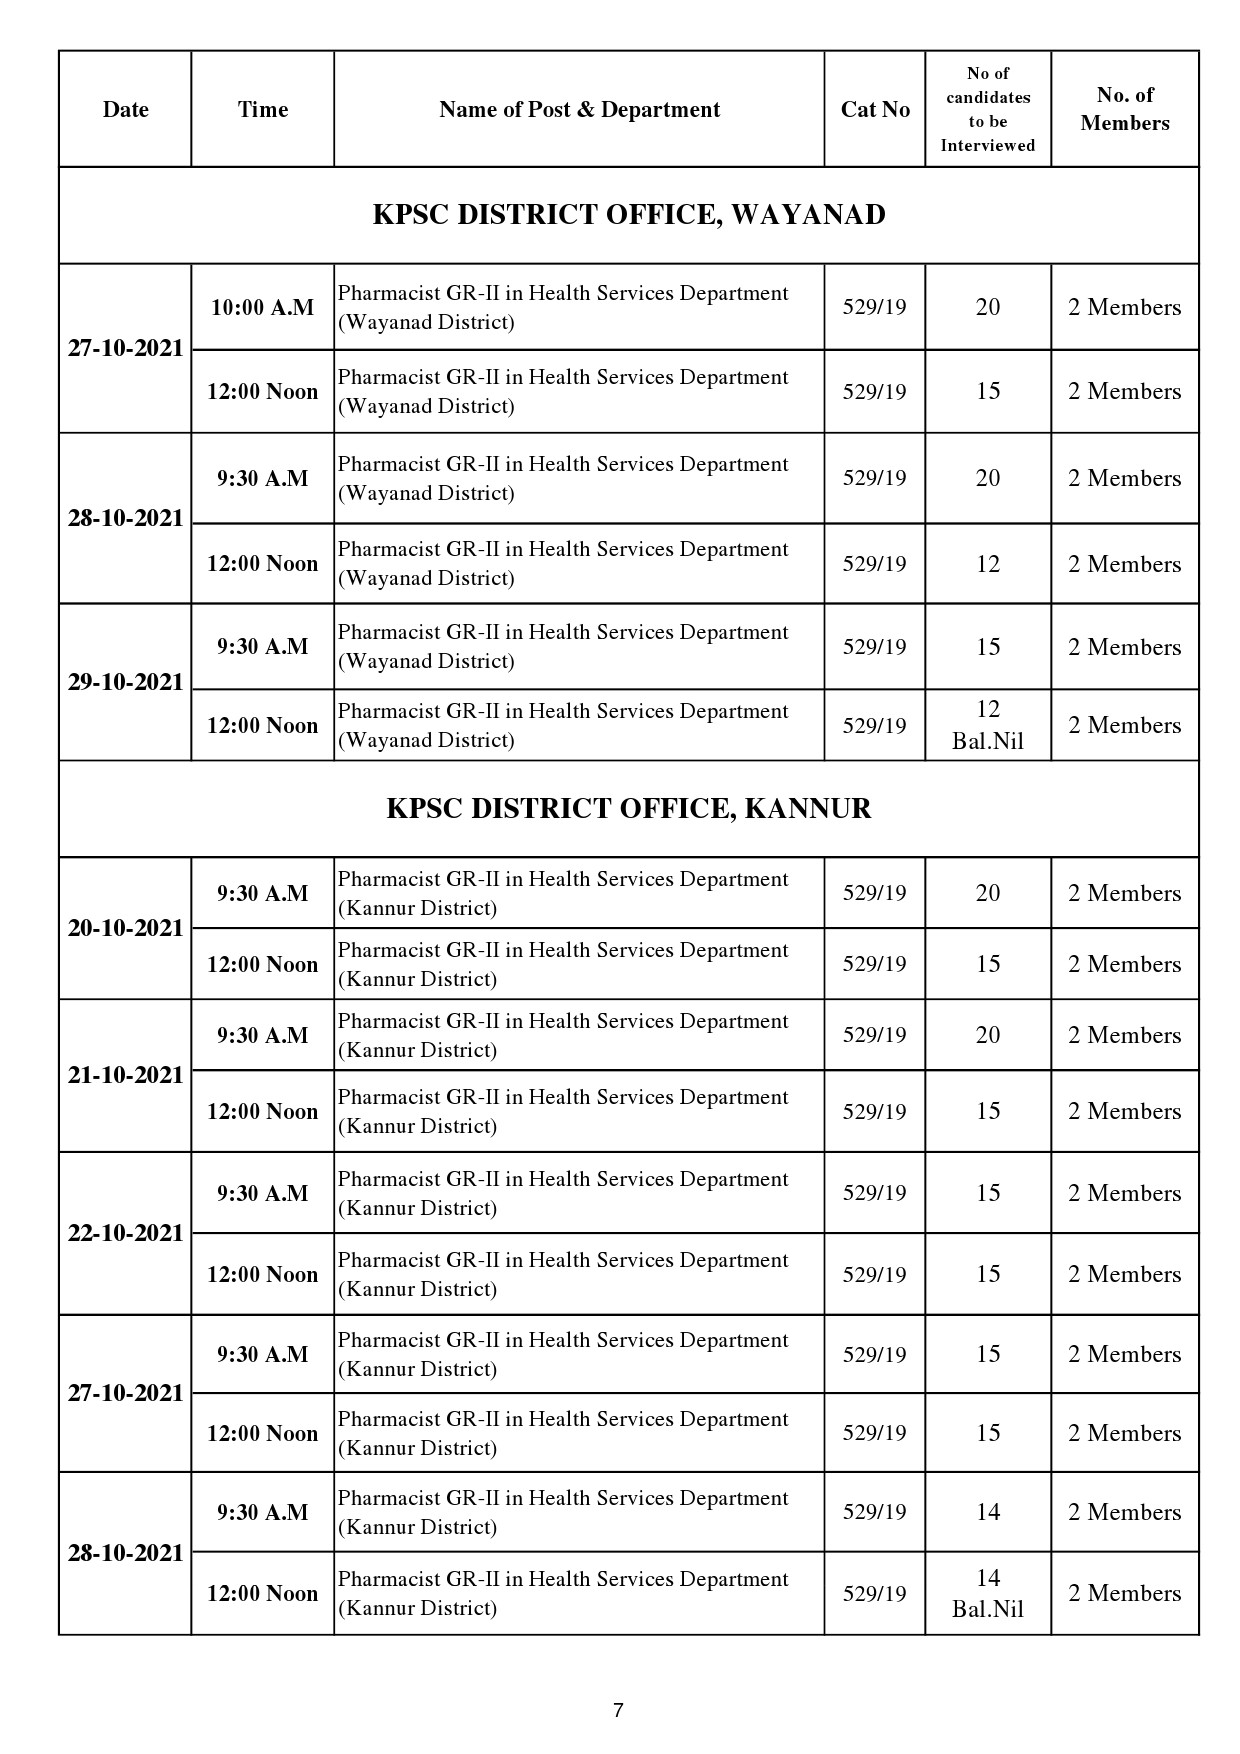 KPSC Interview Programme For The Month Of October 2021 - Notification Image 7